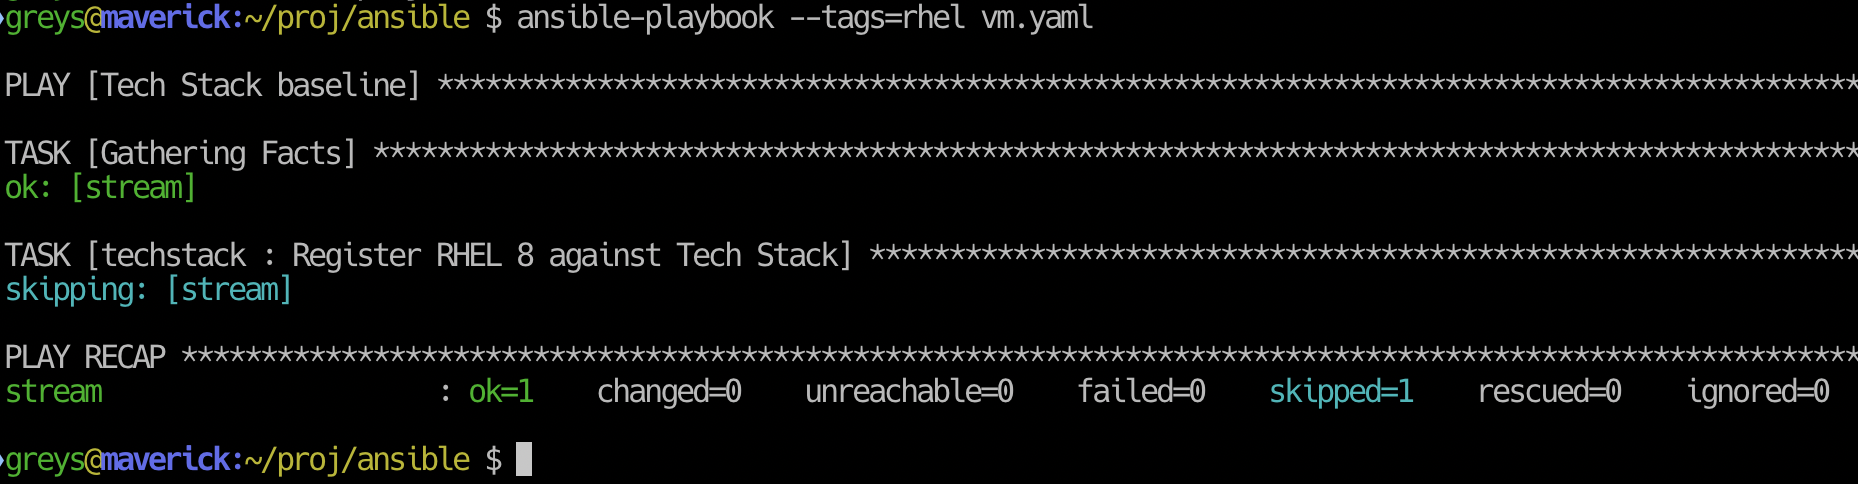 Ansible playbook with Red Hat tag